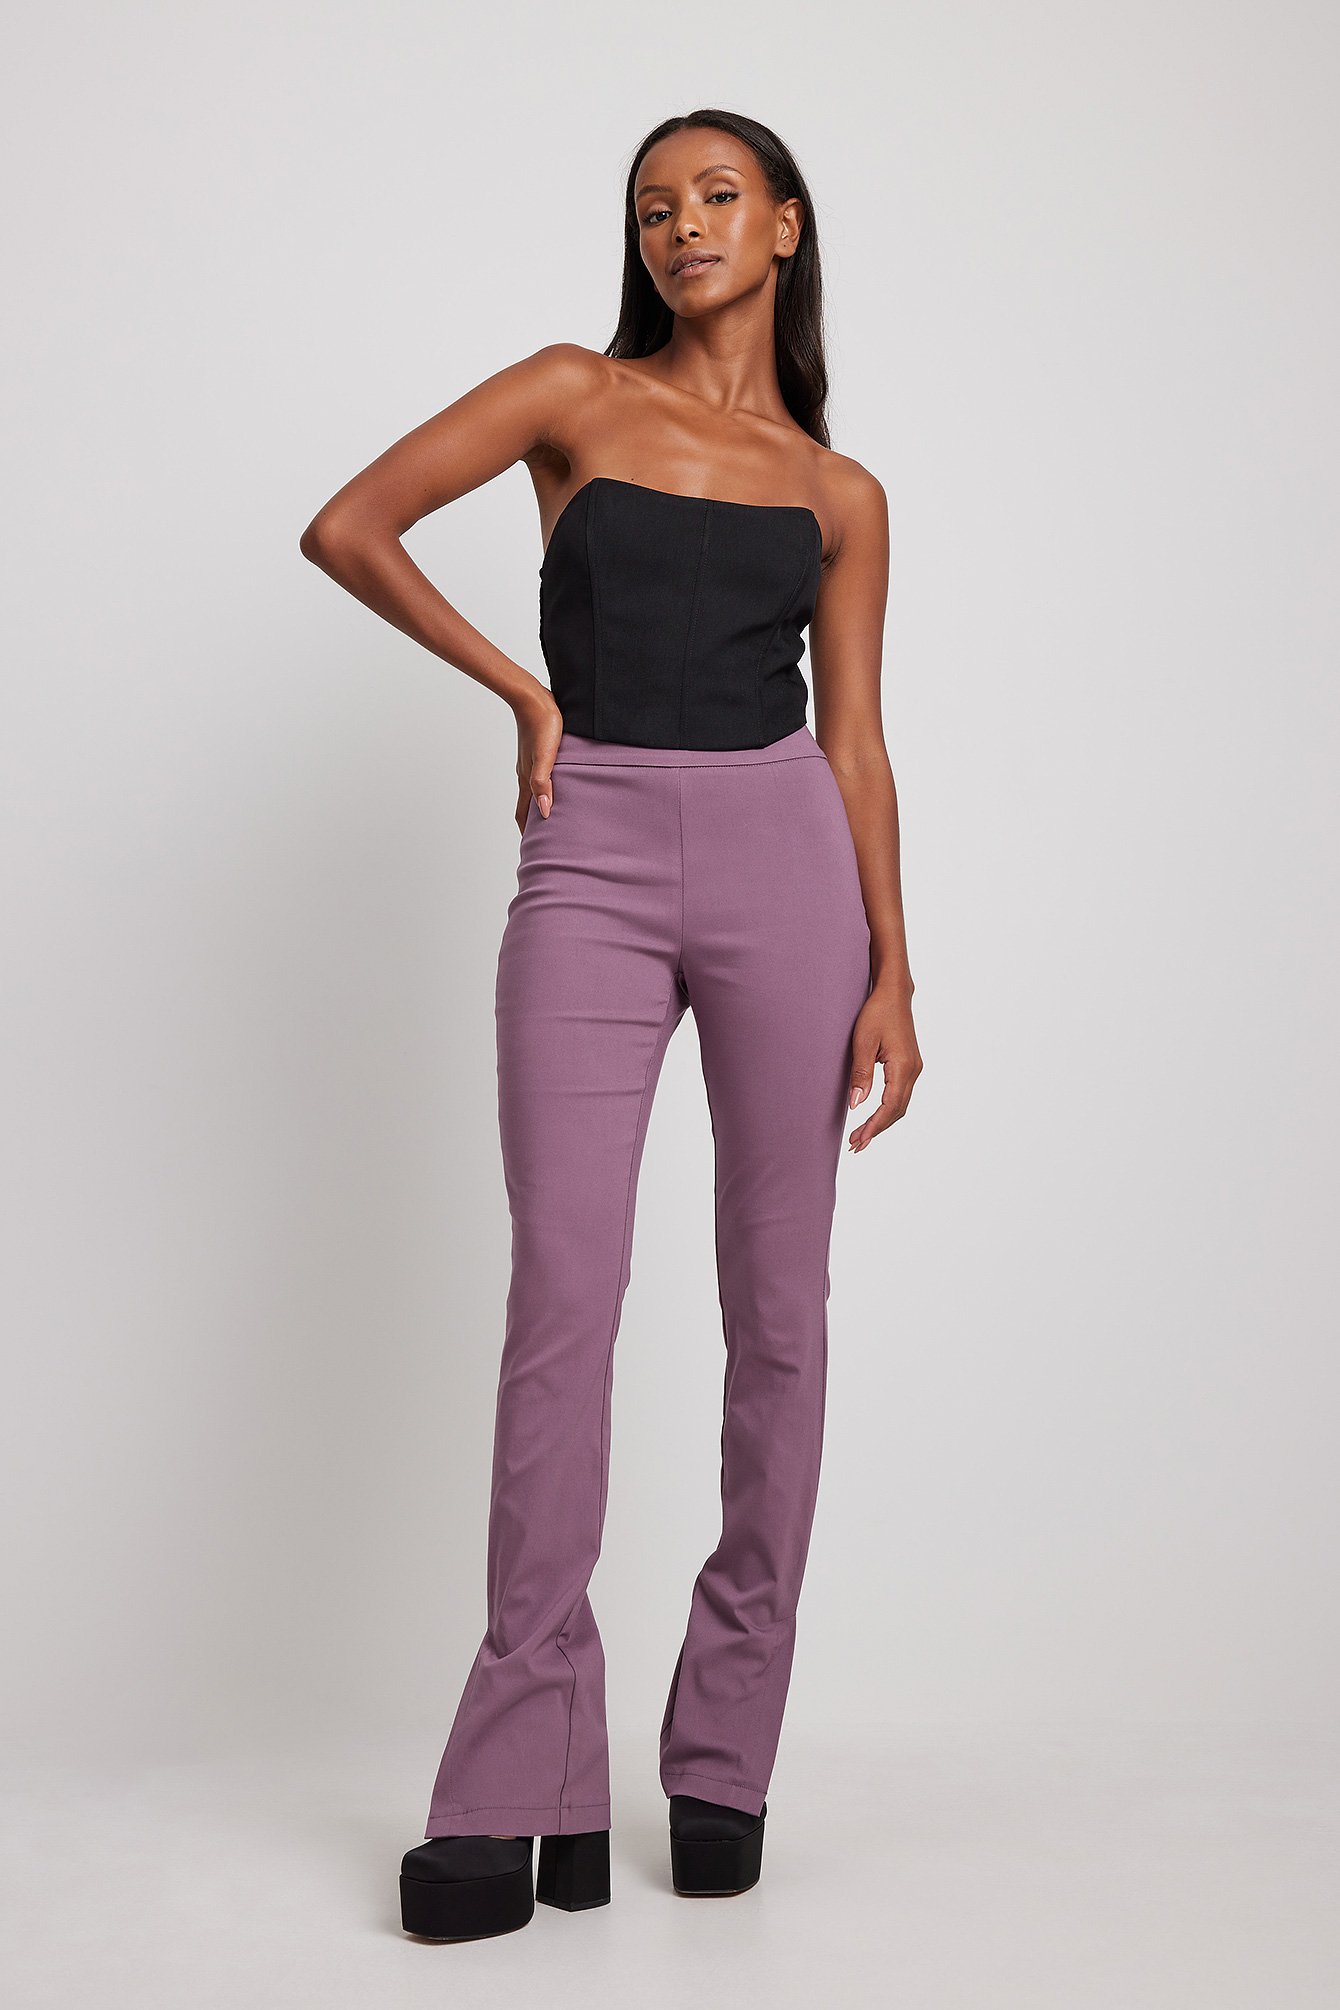 Flare Sleeves Flare Trousers  Extra Petite  Outfit petite Work outfit  Navy pants work outfit